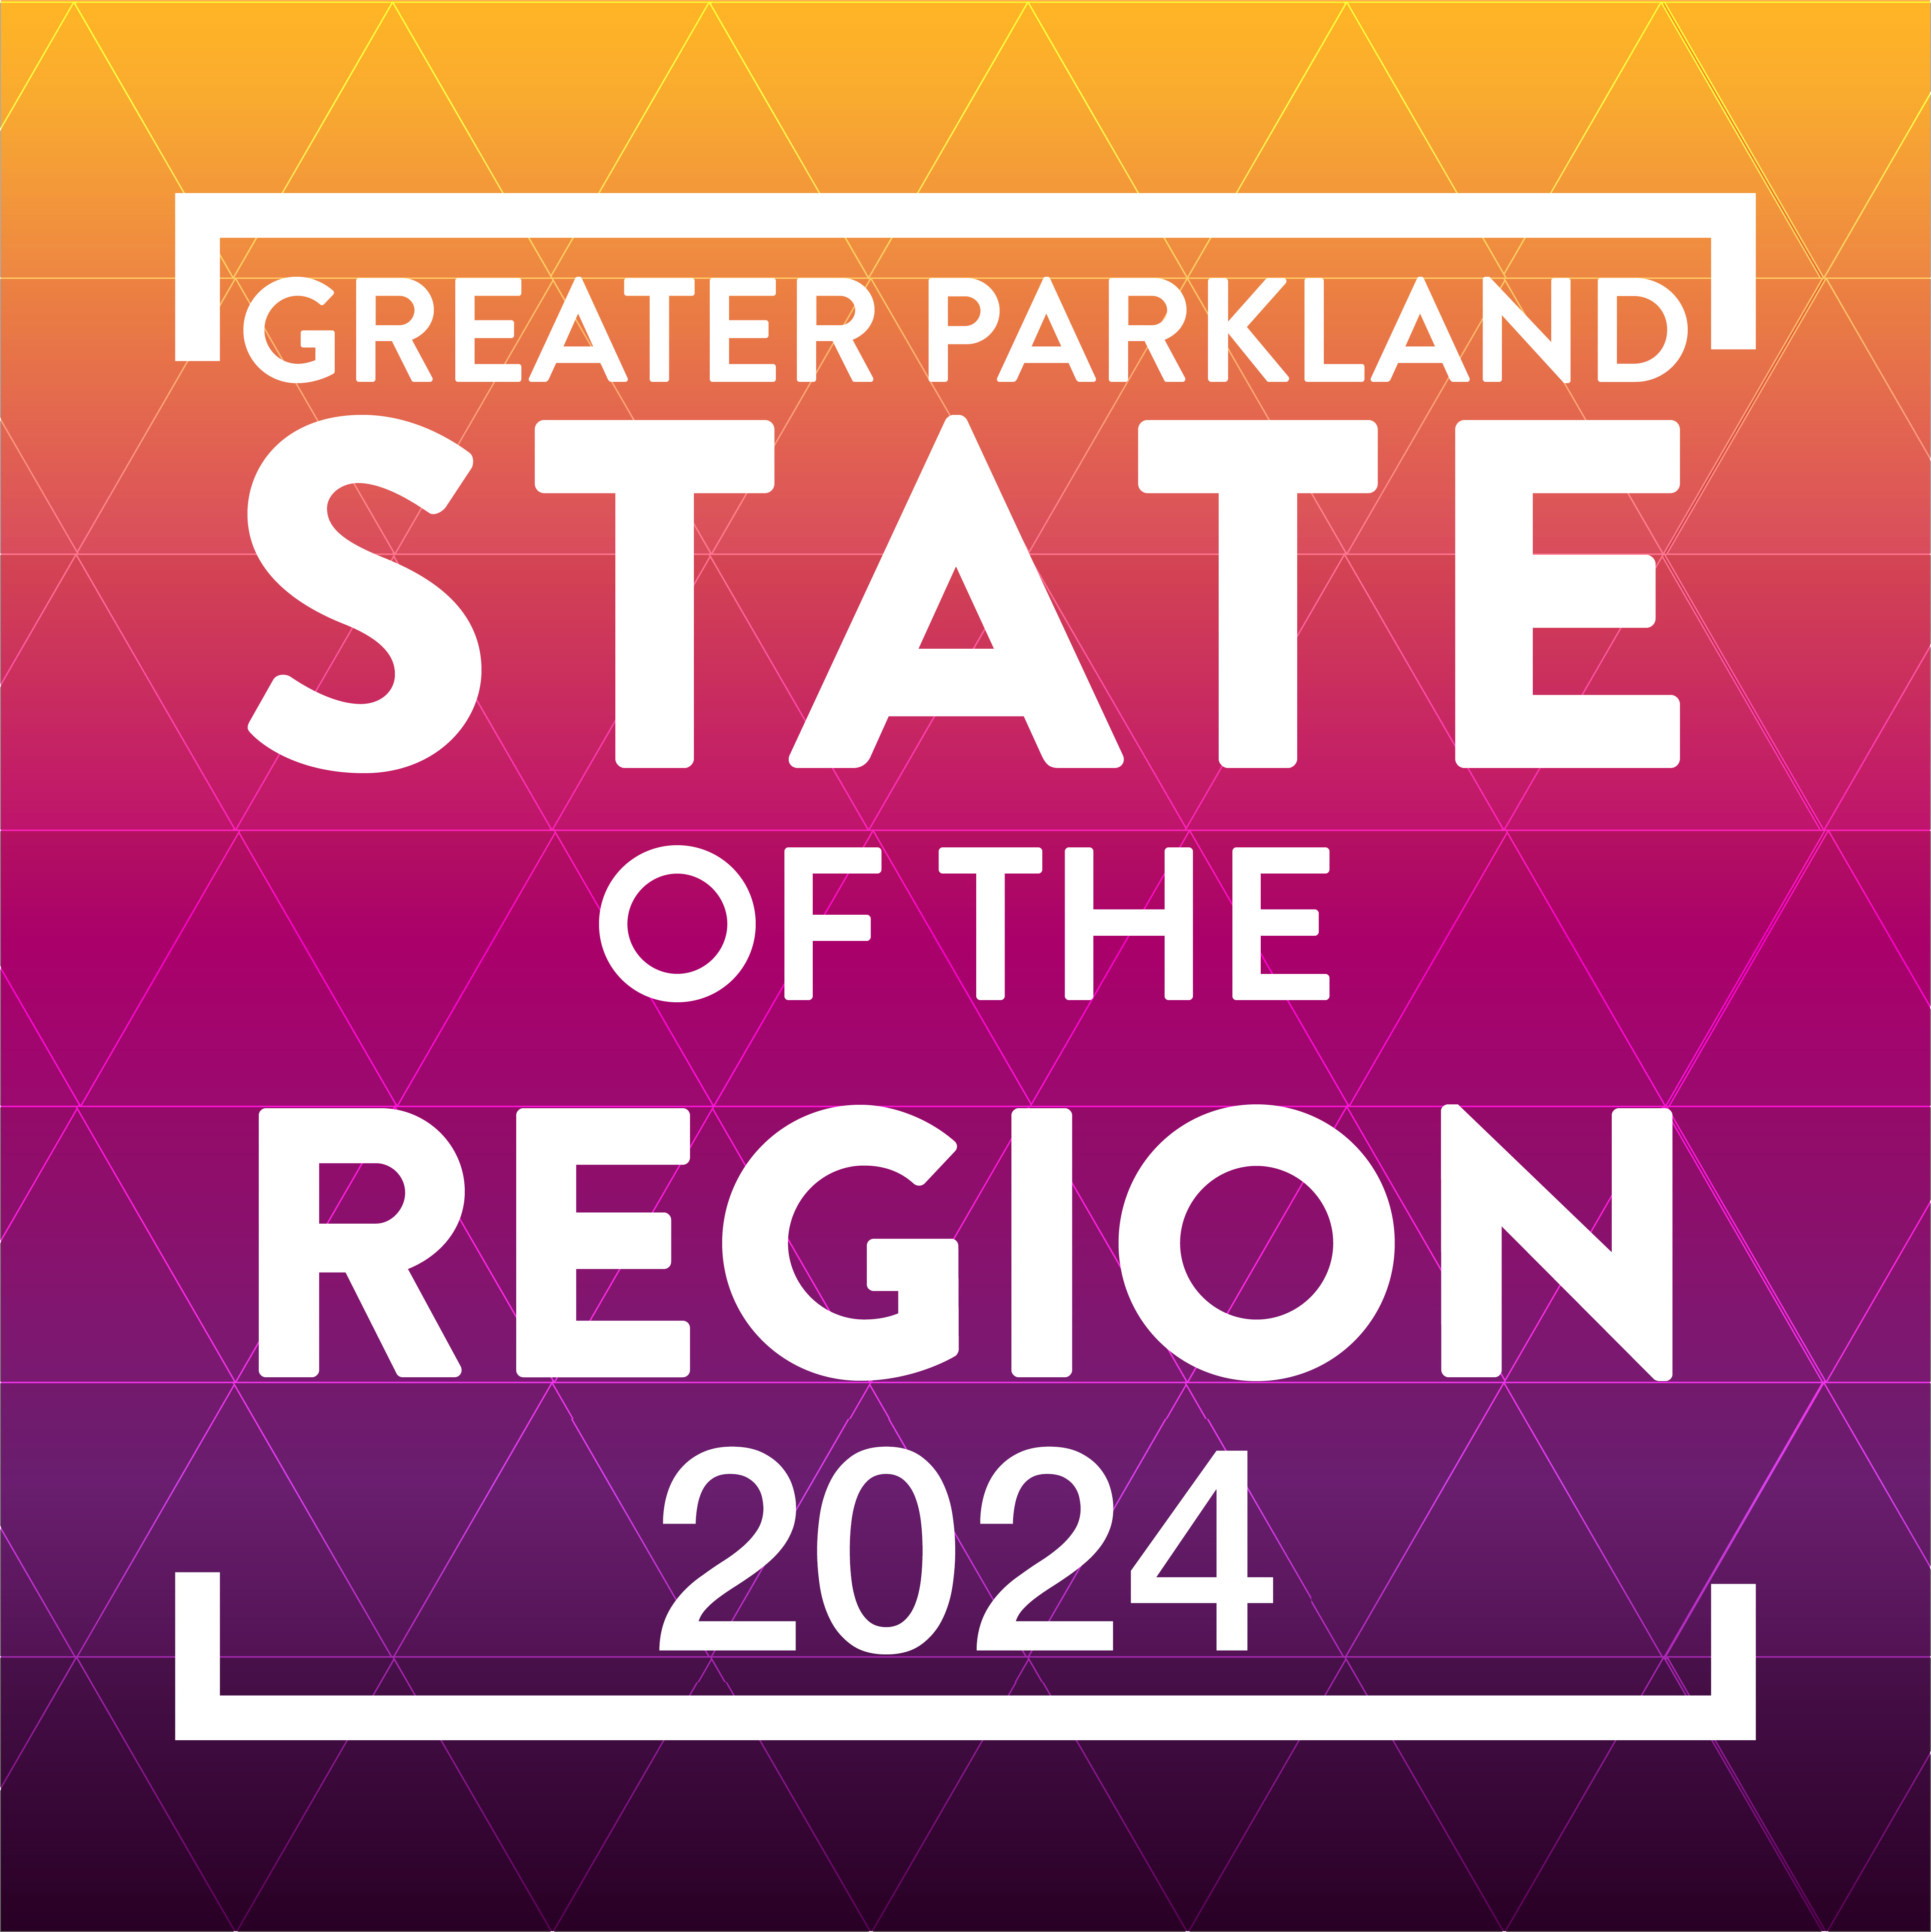 Greater Parkland STate of the Region 2024